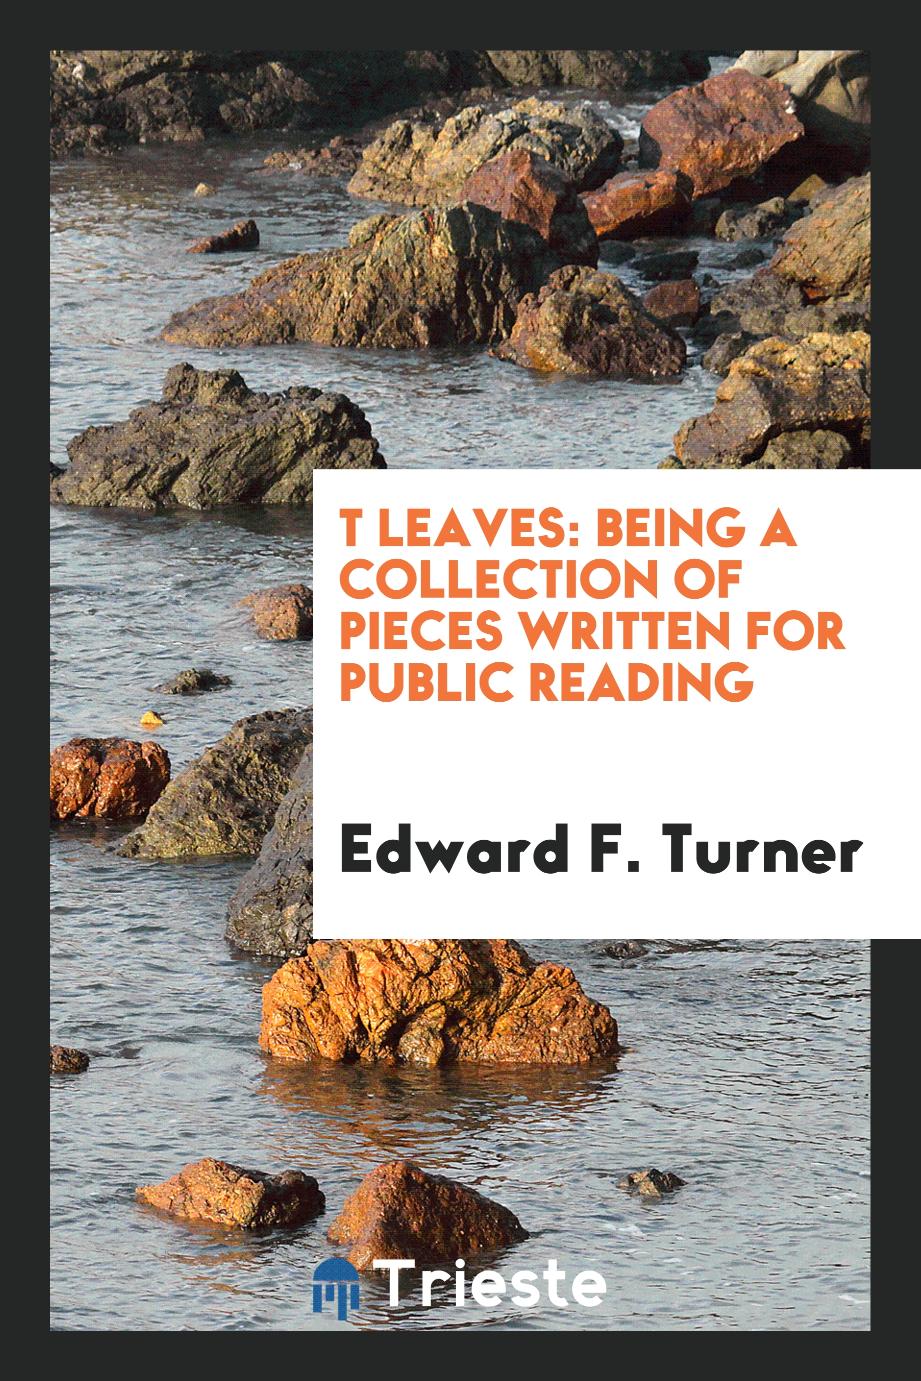 T leaves: being a collection of pieces written for public reading